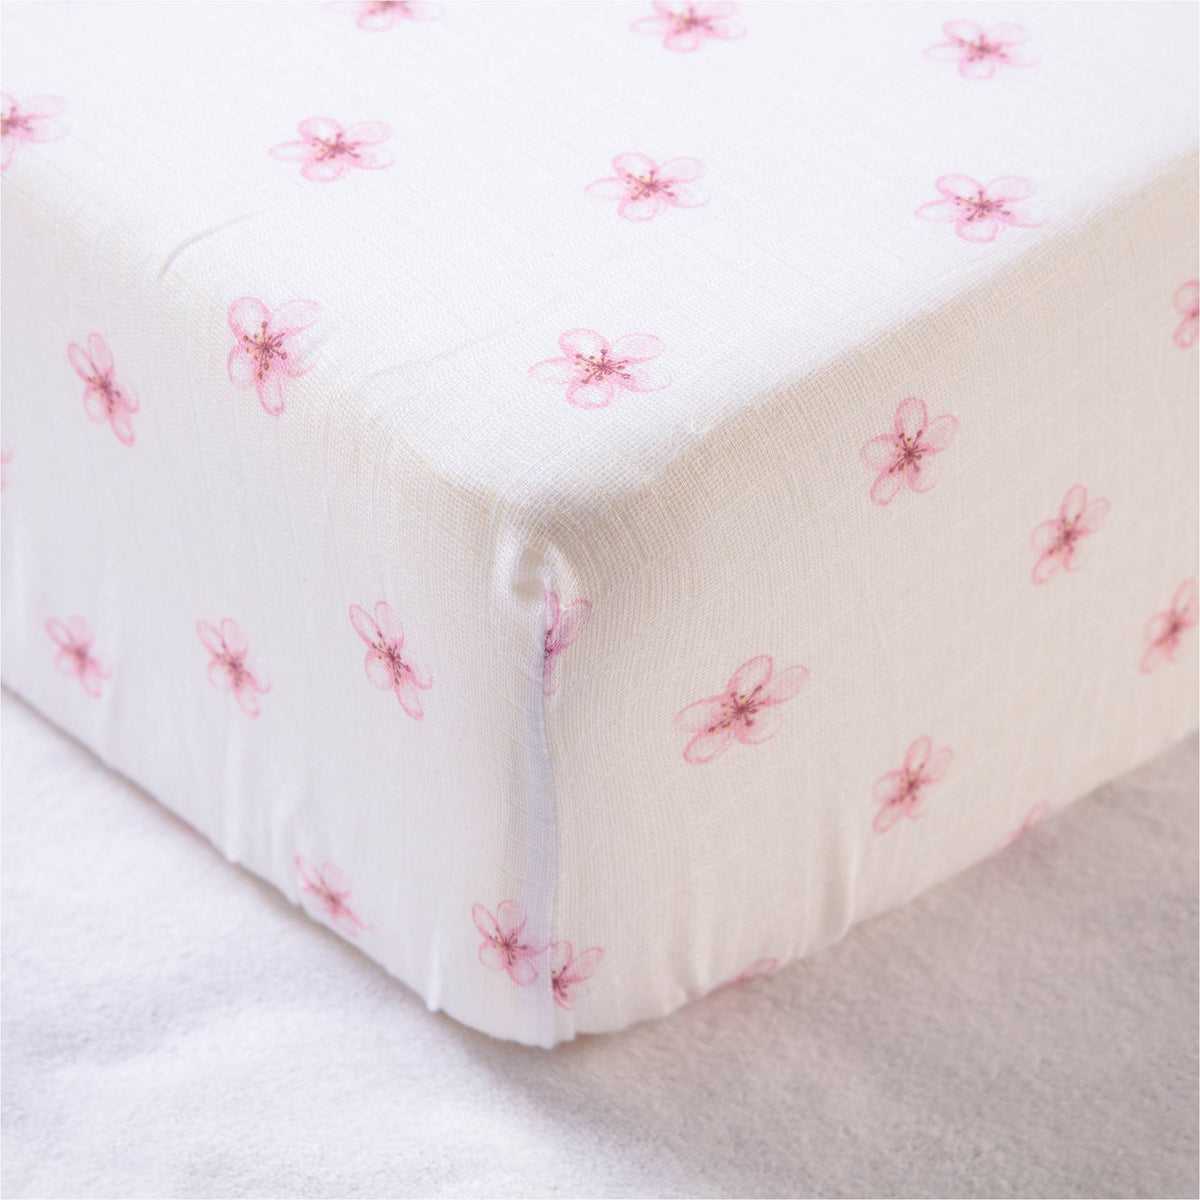 Cotton Muslin Crib Sheet Fitted (Floral)